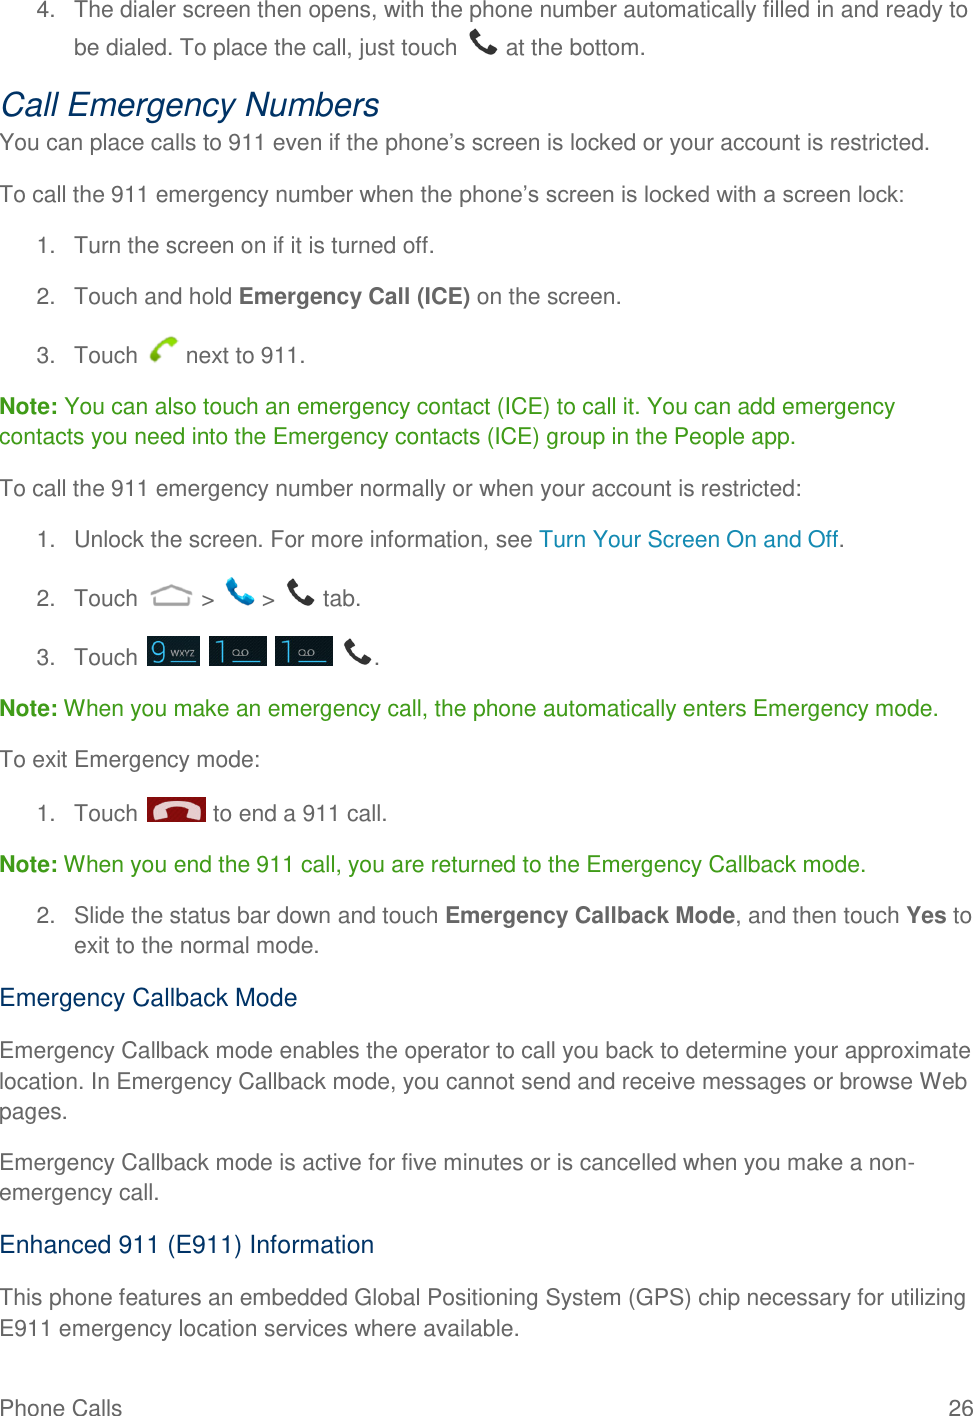 Phone Calls  26 4.  The dialer screen then opens, with the phone number automatically filled in and ready to be dialed. To place the call, just touch   at the bottom. Call Emergency Numbers You can place calls to 911 even if the phone’s screen is locked or your account is restricted. To call the 911 emergency number when the phone’s screen is locked with a screen lock: 1.  Turn the screen on if it is turned off. 2.  Touch and hold Emergency Call (ICE) on the screen. 3.  Touch   next to 911. Note: You can also touch an emergency contact (ICE) to call it. You can add emergency contacts you need into the Emergency contacts (ICE) group in the People app. To call the 911 emergency number normally or when your account is restricted: 1.  Unlock the screen. For more information, see Turn Your Screen On and Off. 2.  Touch   &gt;   &gt;   tab. 3.  Touch        . Note: When you make an emergency call, the phone automatically enters Emergency mode. To exit Emergency mode: 1.  Touch   to end a 911 call. Note: When you end the 911 call, you are returned to the Emergency Callback mode. 2.  Slide the status bar down and touch Emergency Callback Mode, and then touch Yes to exit to the normal mode. Emergency Callback Mode Emergency Callback mode enables the operator to call you back to determine your approximate location. In Emergency Callback mode, you cannot send and receive messages or browse Web pages. Emergency Callback mode is active for five minutes or is cancelled when you make a non-emergency call. Enhanced 911 (E911) Information This phone features an embedded Global Positioning System (GPS) chip necessary for utilizing E911 emergency location services where available. 